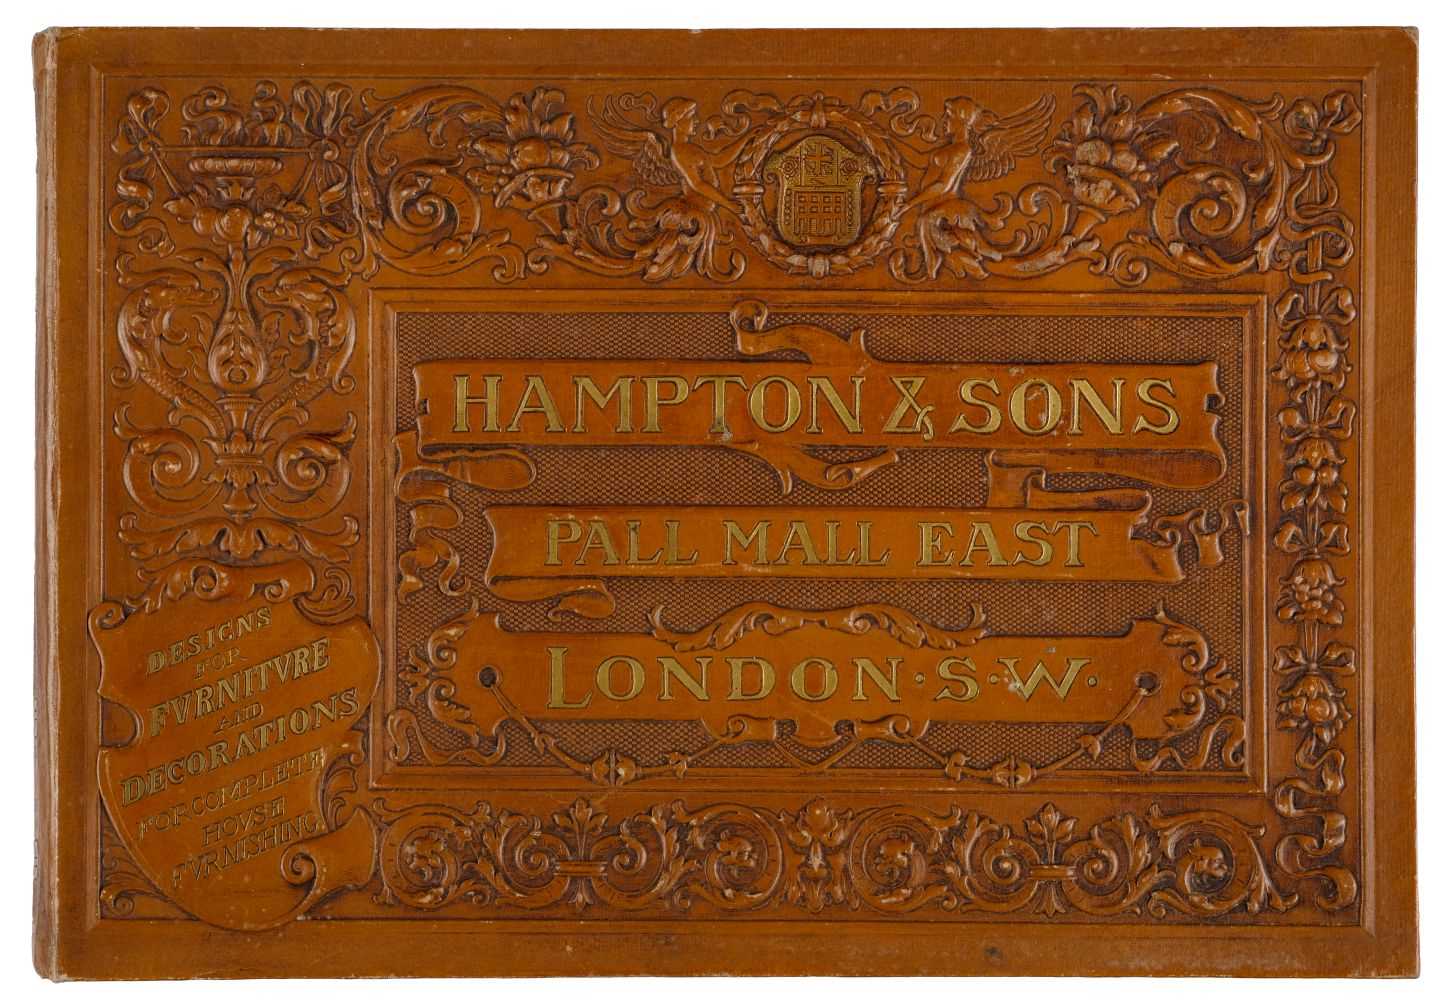 Lot 403 - Trade Catalogue. Designs for Furniture and Decorations by Hampton & Sons, circa 1892